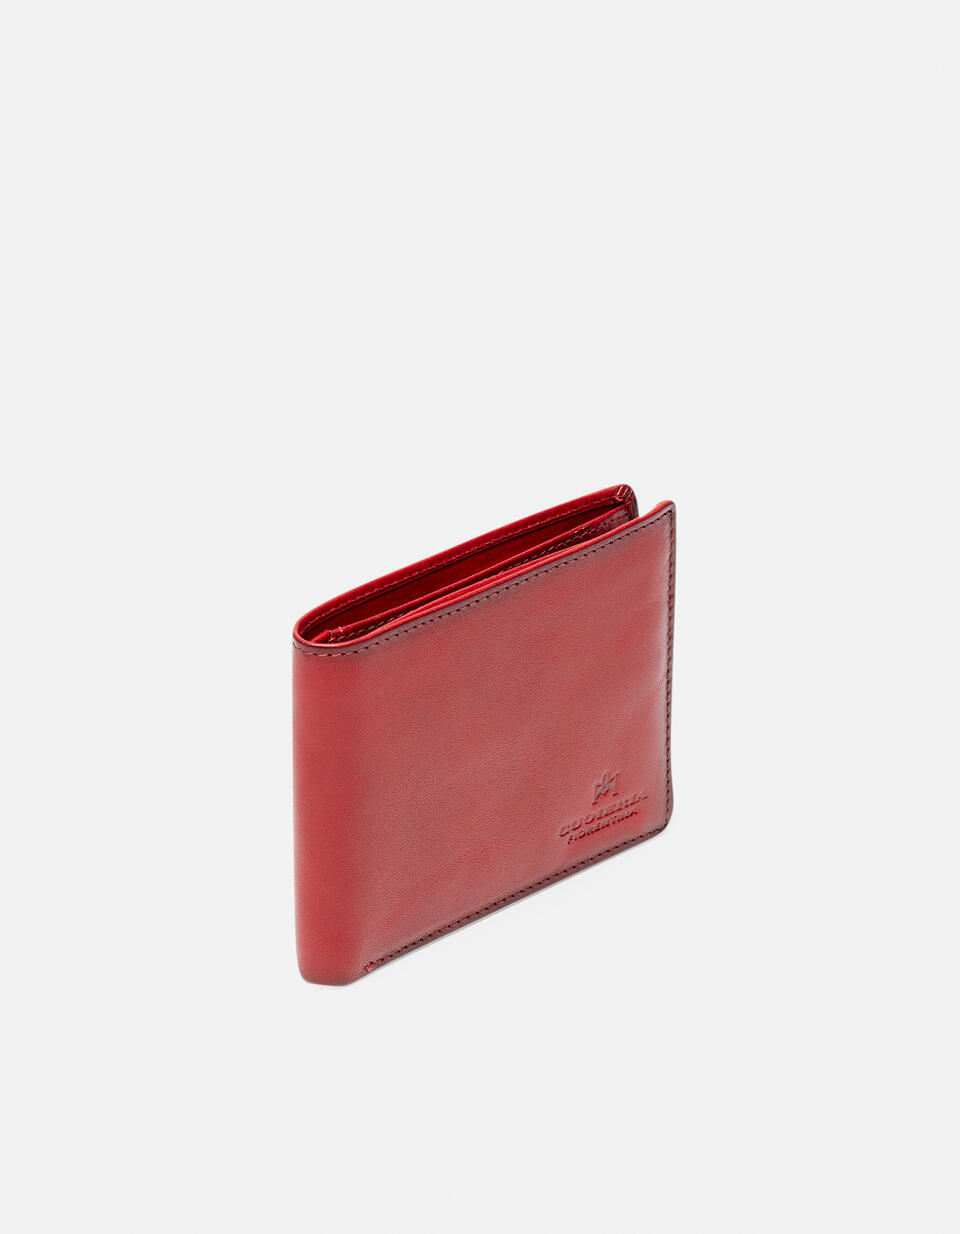 Leather Warm and Color Anti-RFid Wallet - Women's Wallets - Men's Wallets | Wallets ROSSO - Women's Wallets - Men's Wallets | WalletsCuoieria Fiorentina